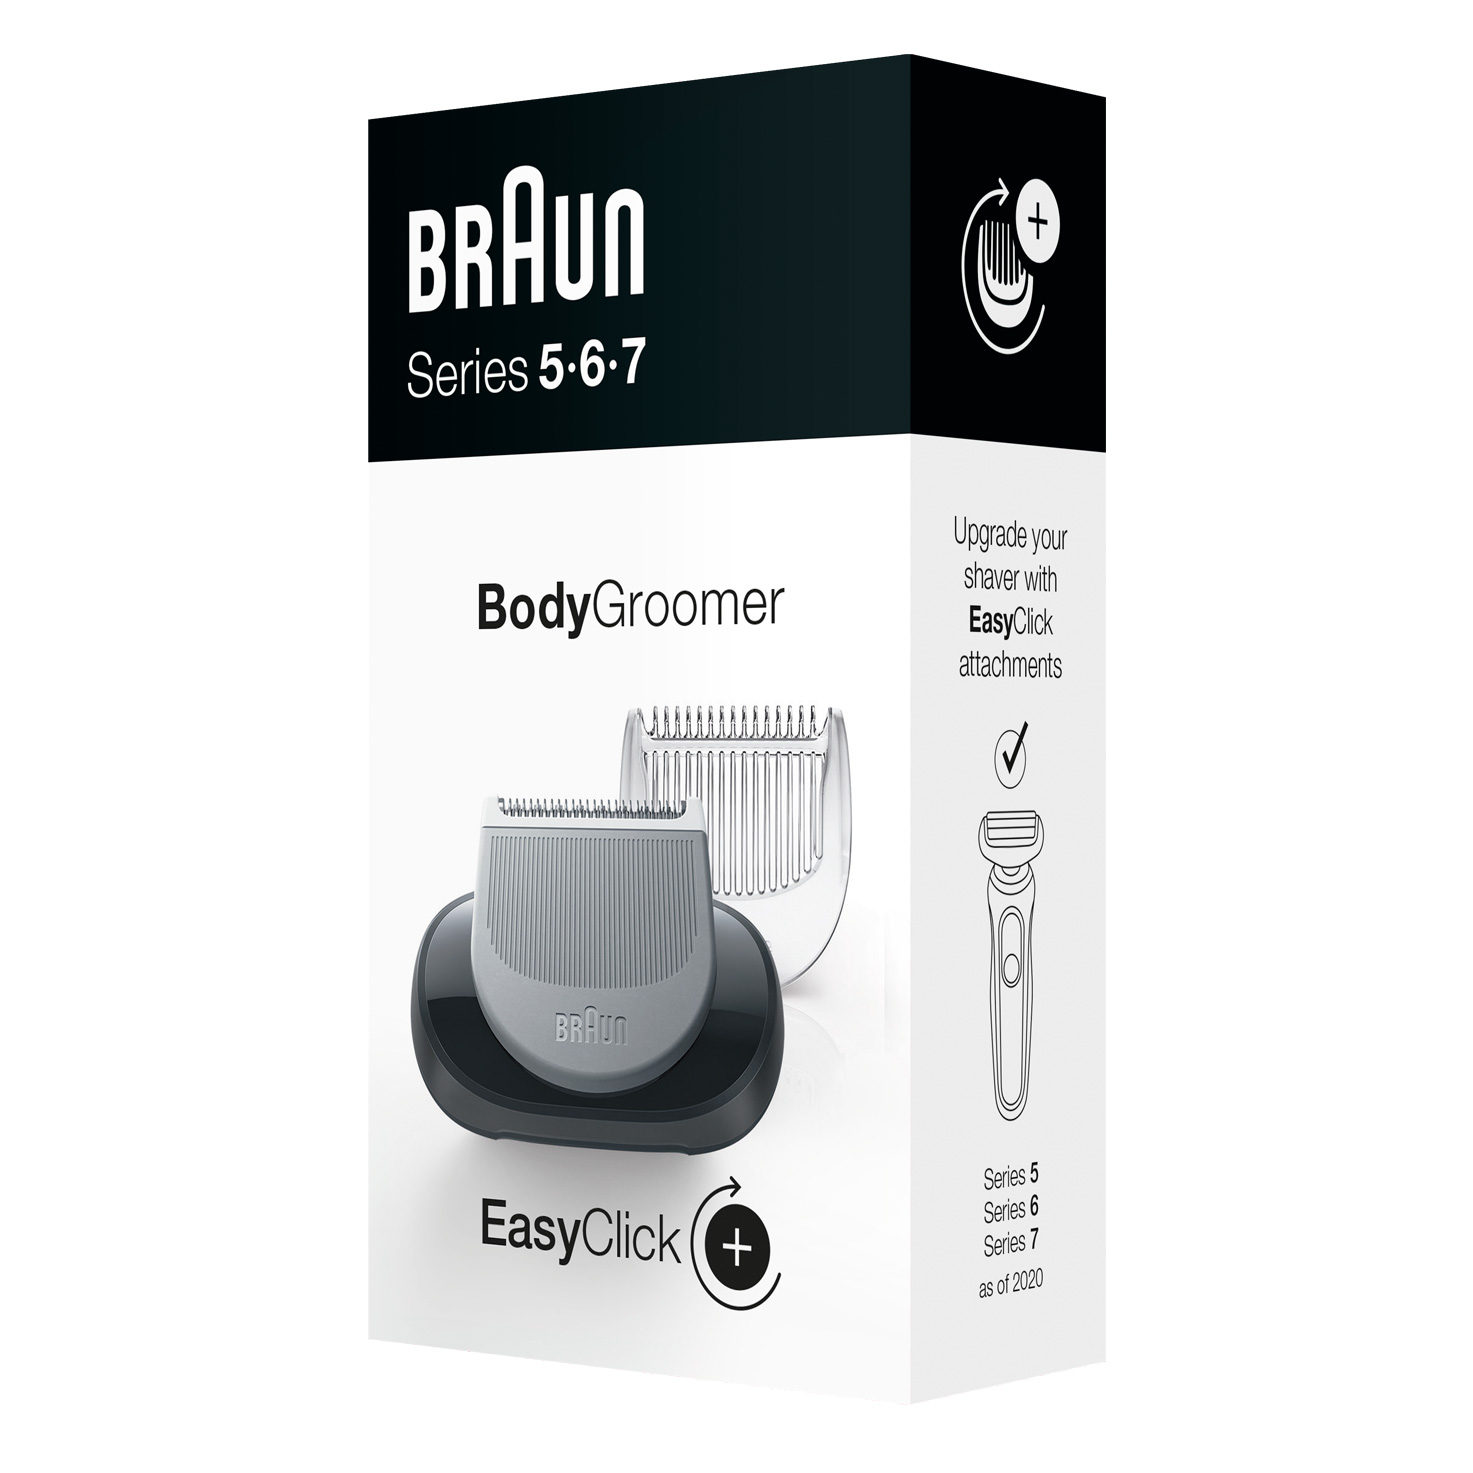 EasyClick Body Groomer attachment for Braun Series 5, 6 and 7 electric shaver 